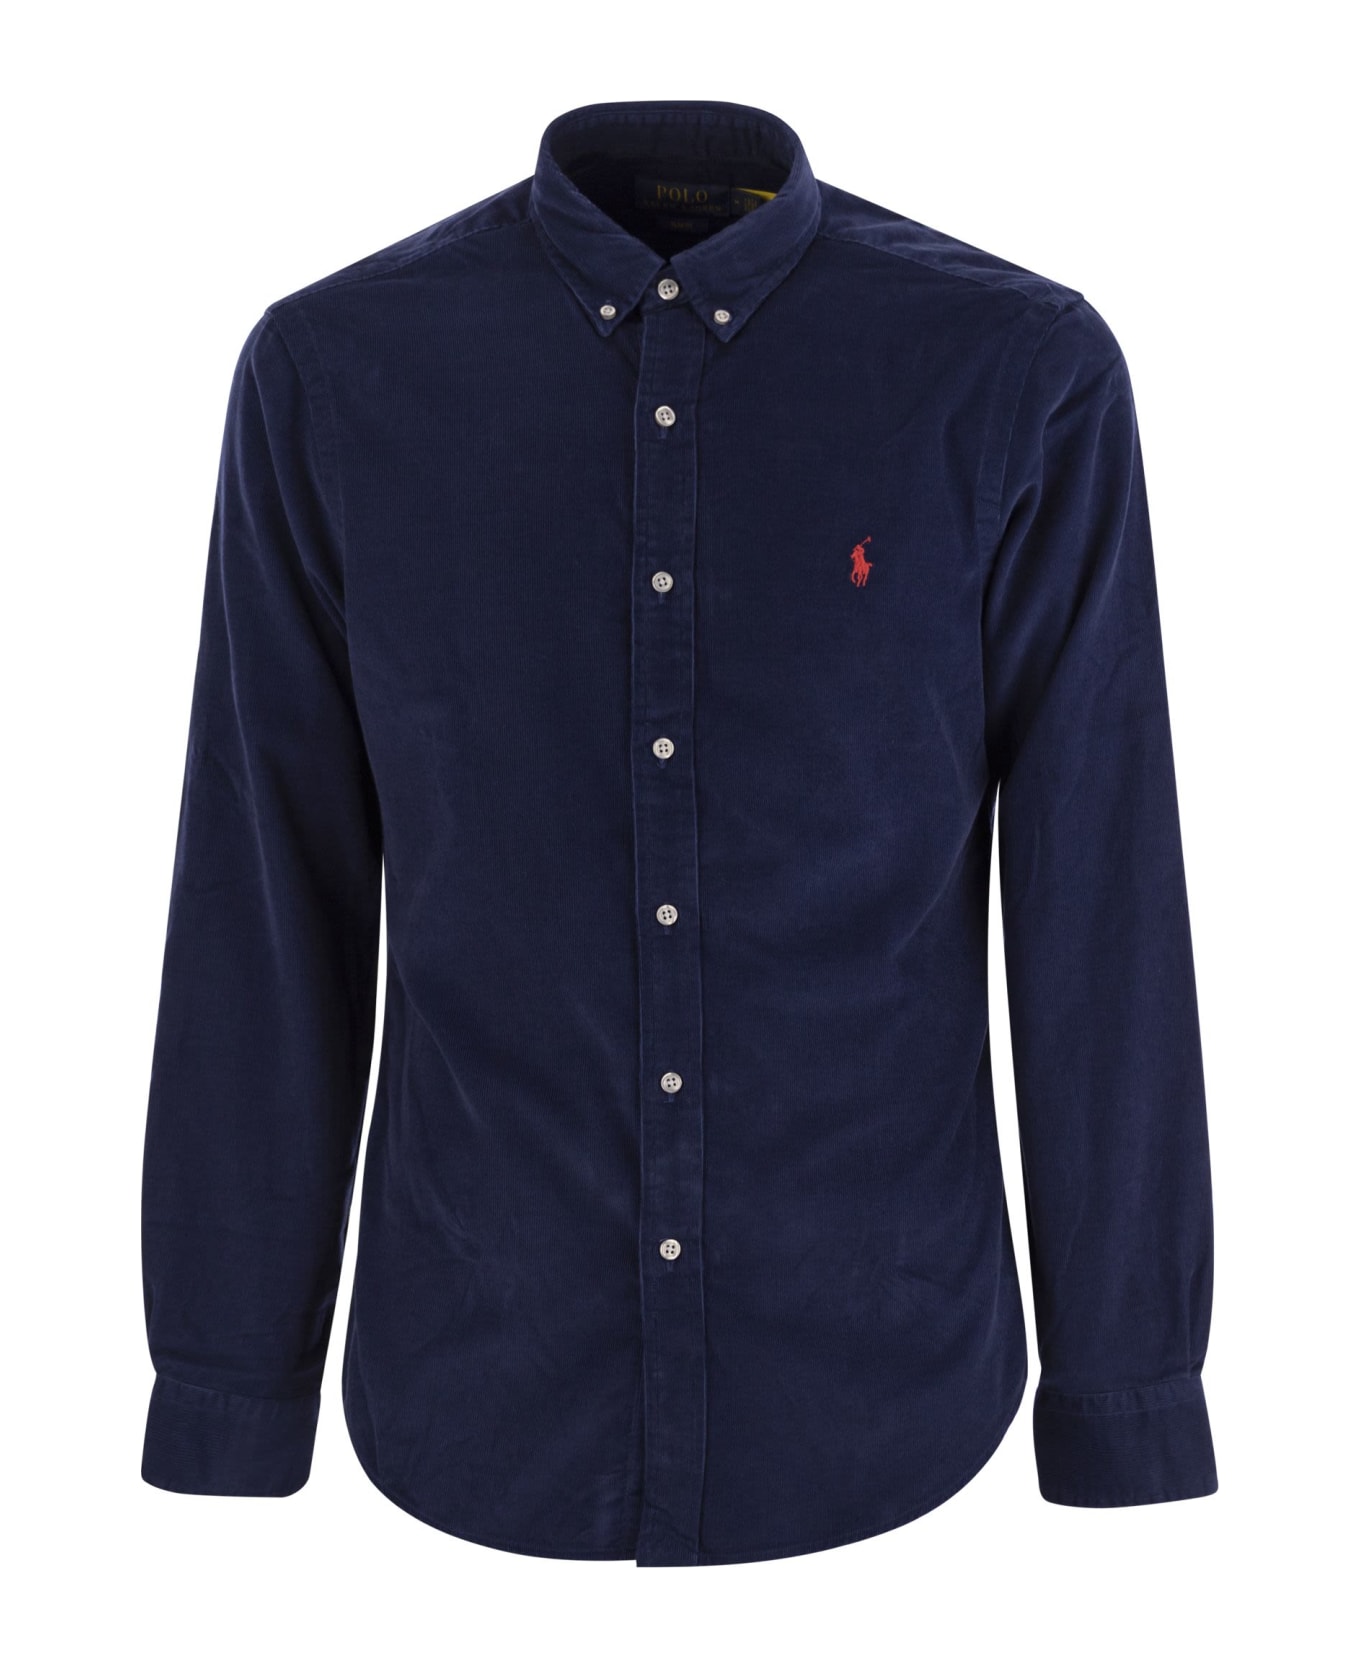 Polo Ralph Lauren Man Slim Fit Shirt In Night Blue Fustian With Contrast Pony Polo Ralph Lauren - Blue